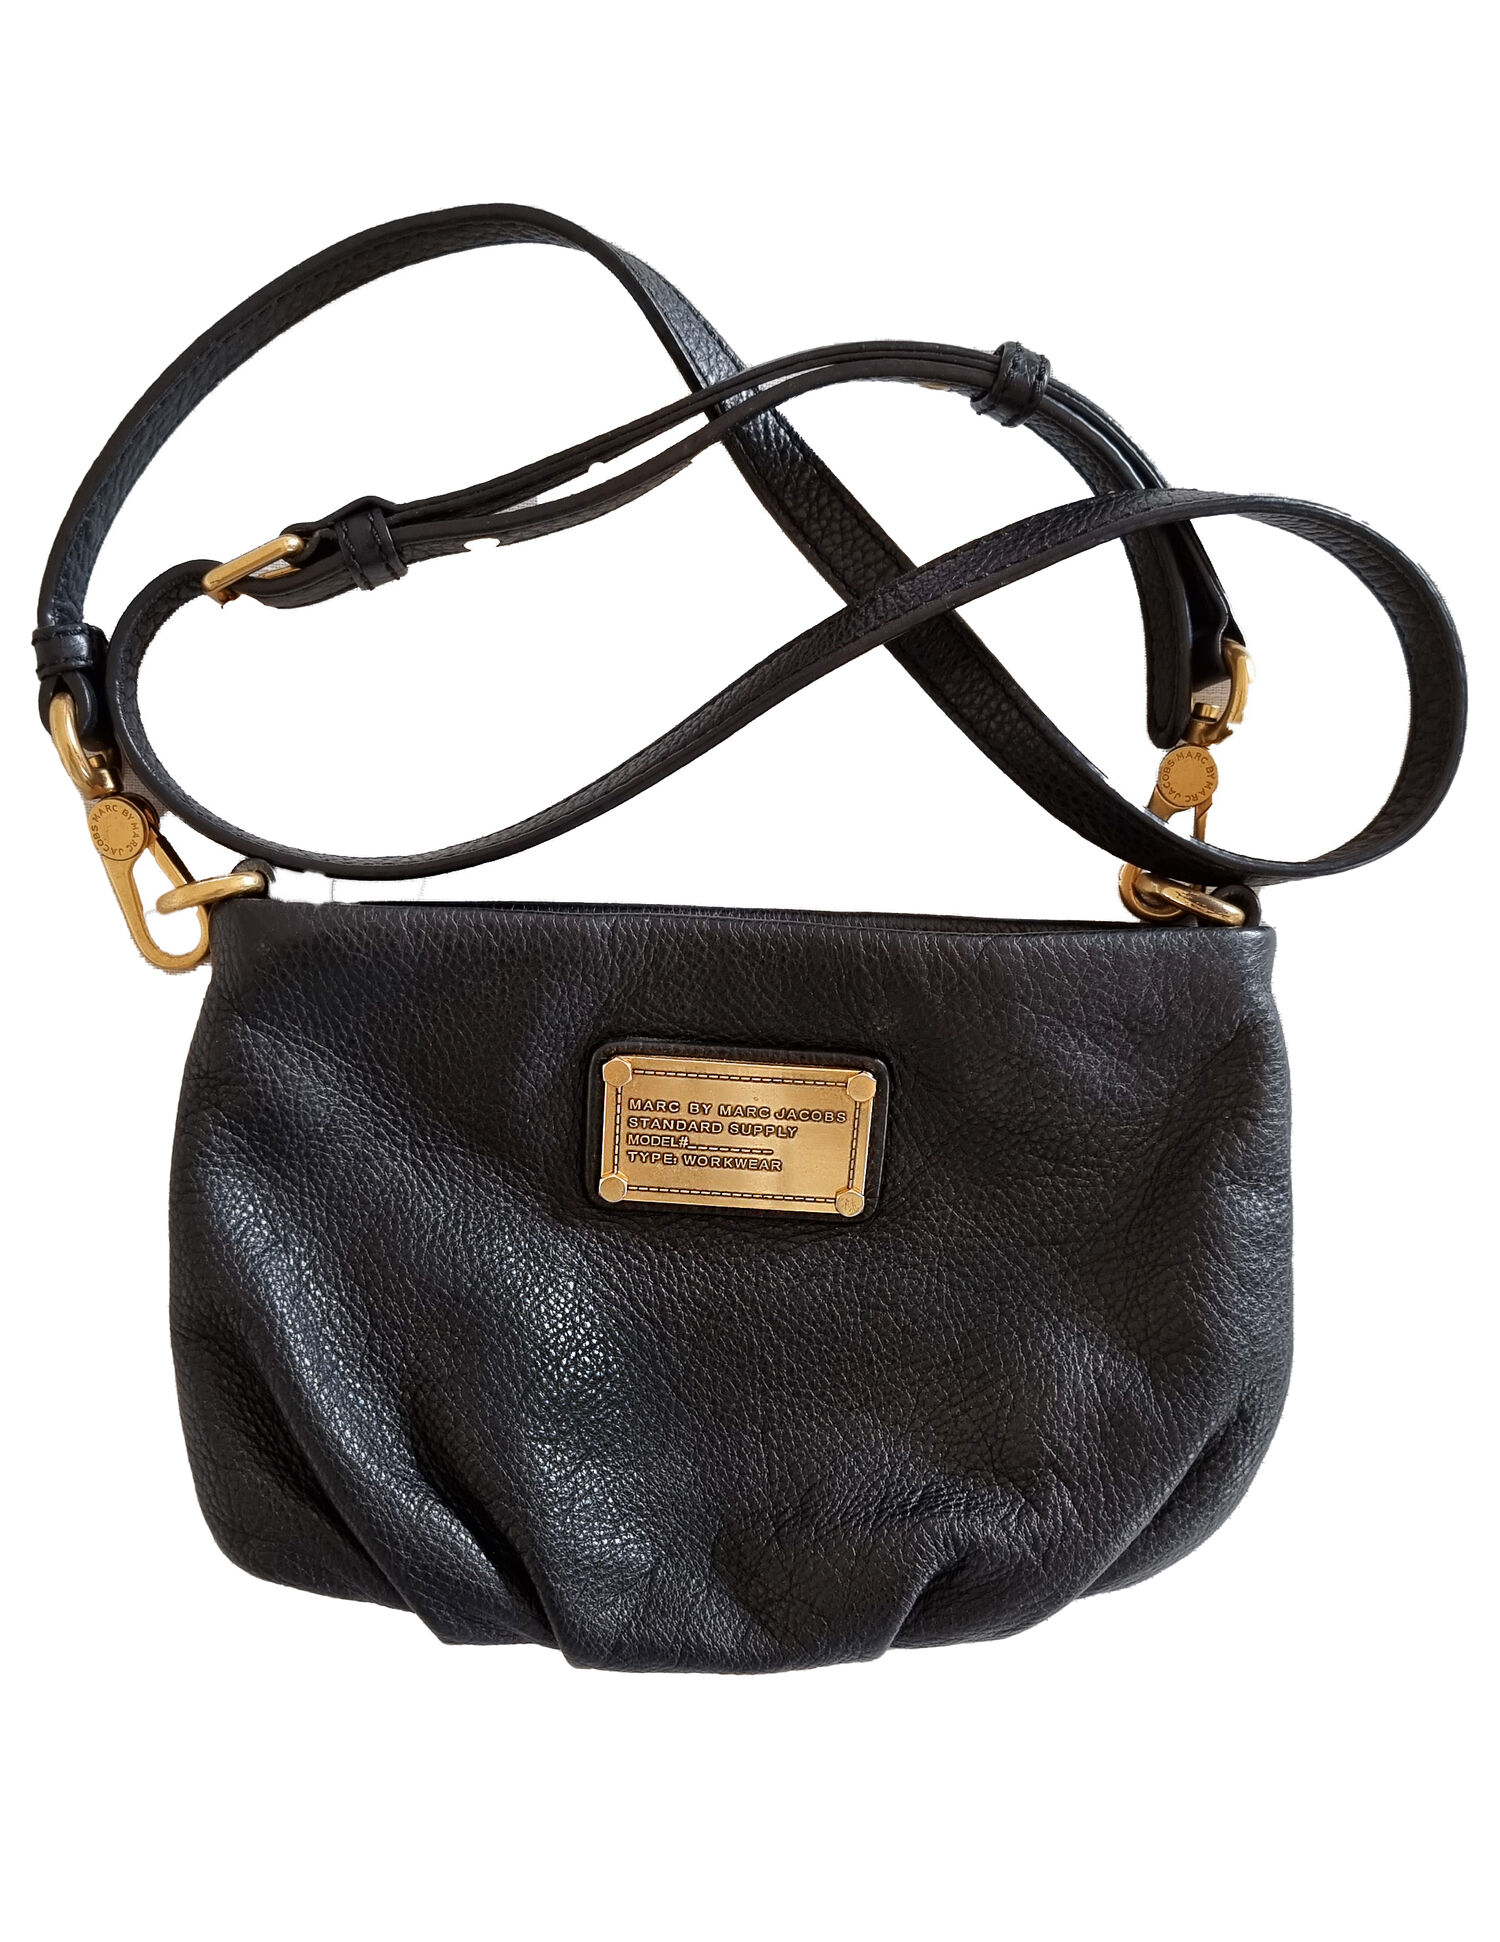 Leather Cross-body bag Marc by Marc Jacobs, buy pre-owned 50